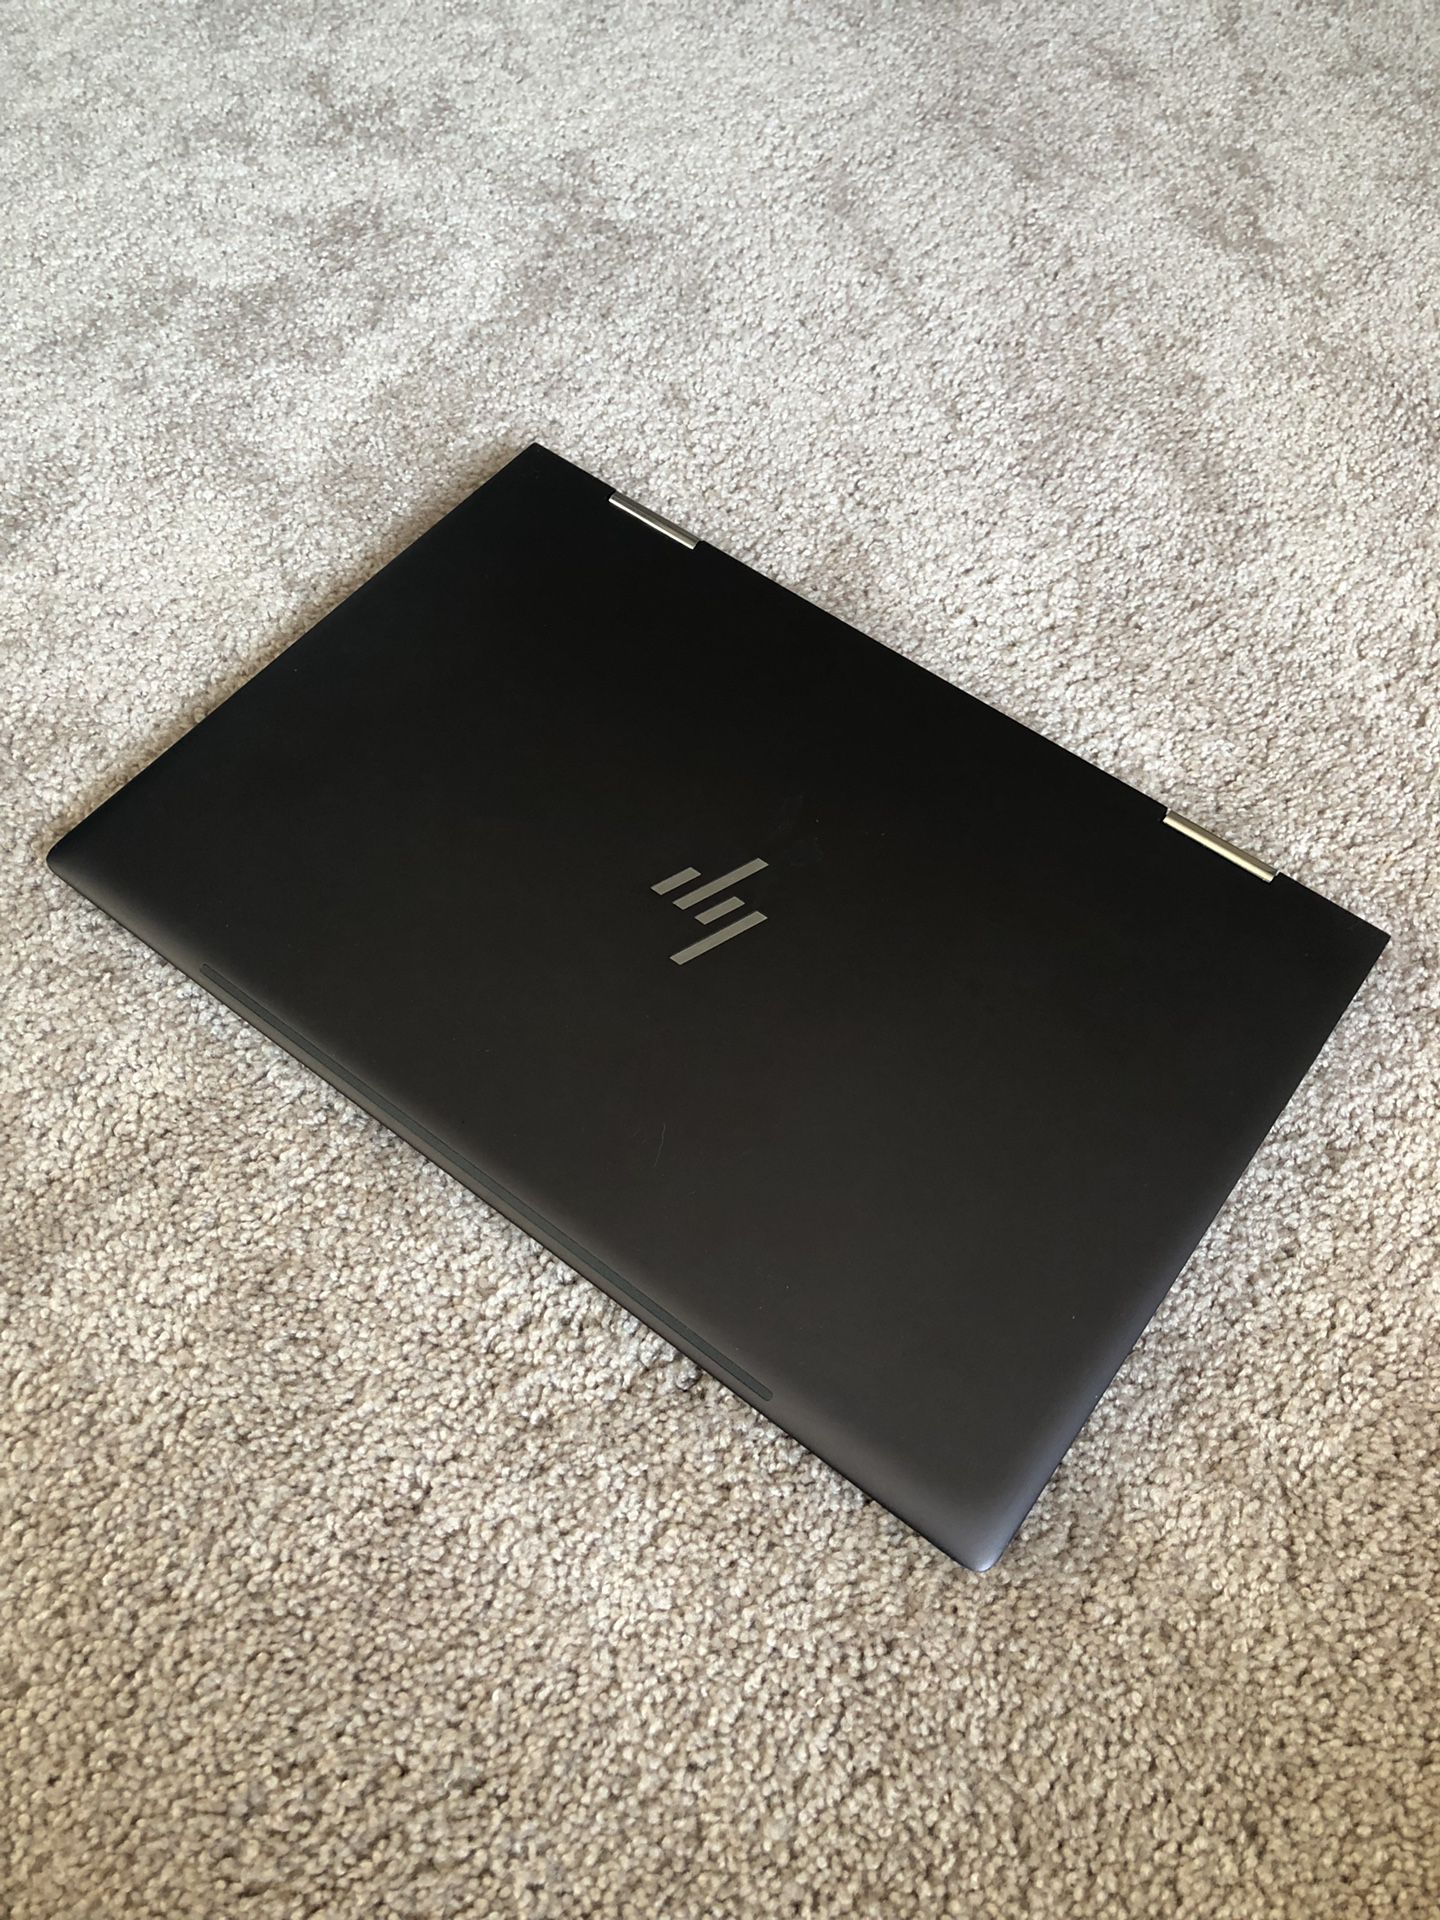 HP 360 2-in-1 Convertible Laptop